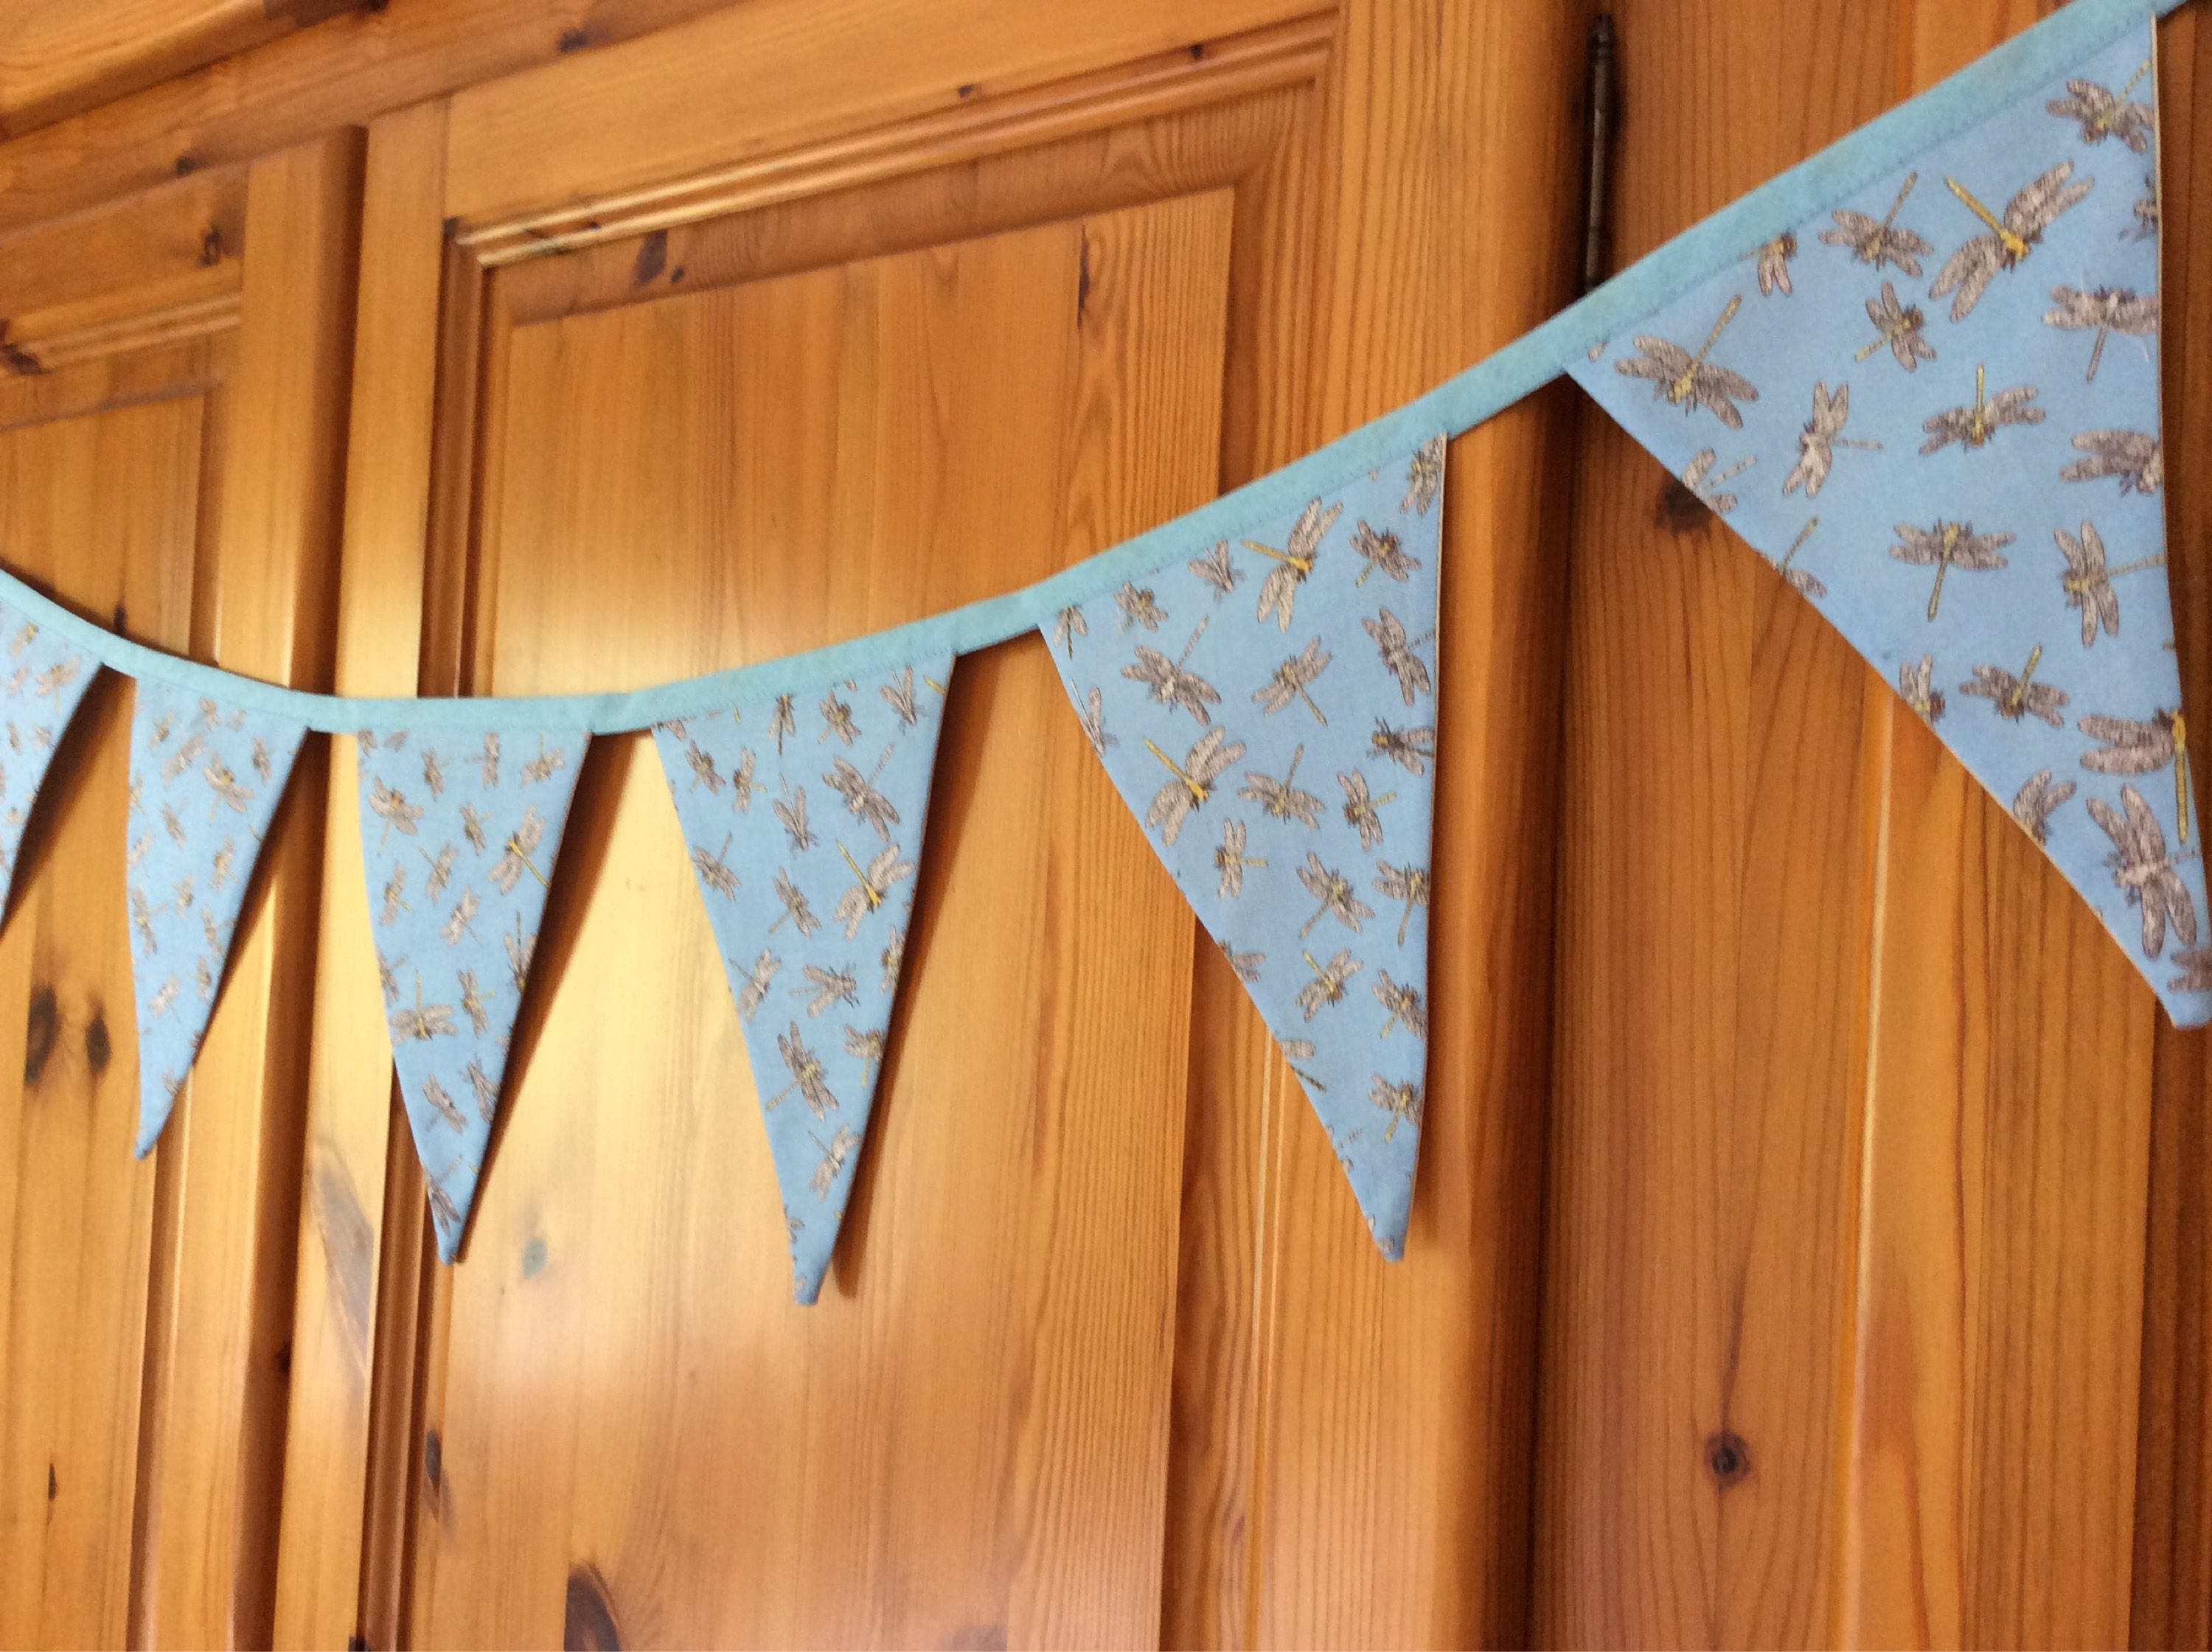 Bunting - dragonflies (10 flags)